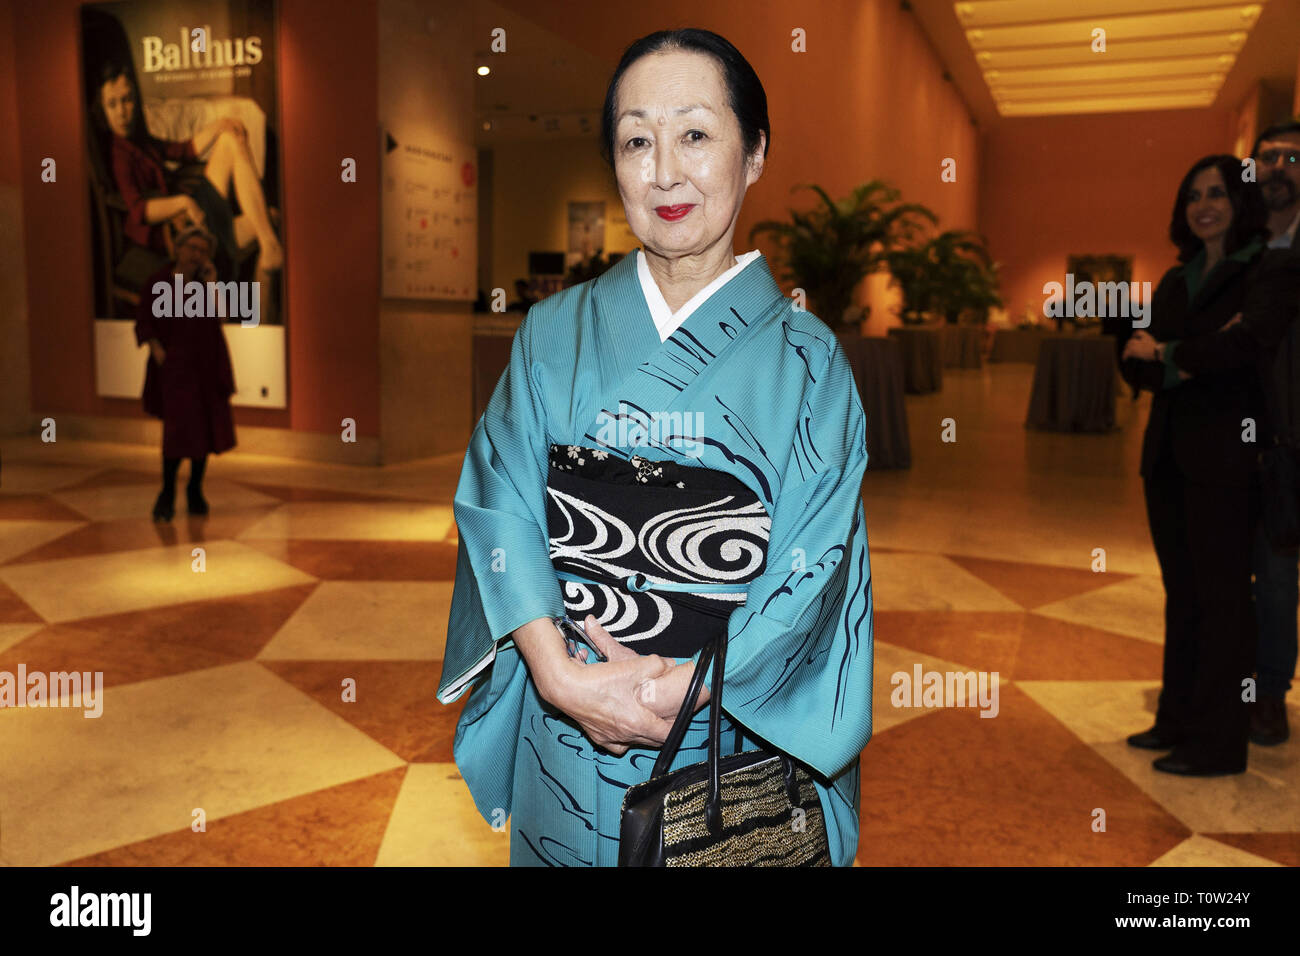 The opening of the Balthus exhibition by French artist Balthasar Klossowski de Rola at the Thyssen-Bornemisza National Museum in Madrid  Featuring: Setsuko Klossowska de Rola Where: Madrid, Spain When: 18 Feb 2019 Credit: Oscar Gonzalez/WENN.com Stock Photo